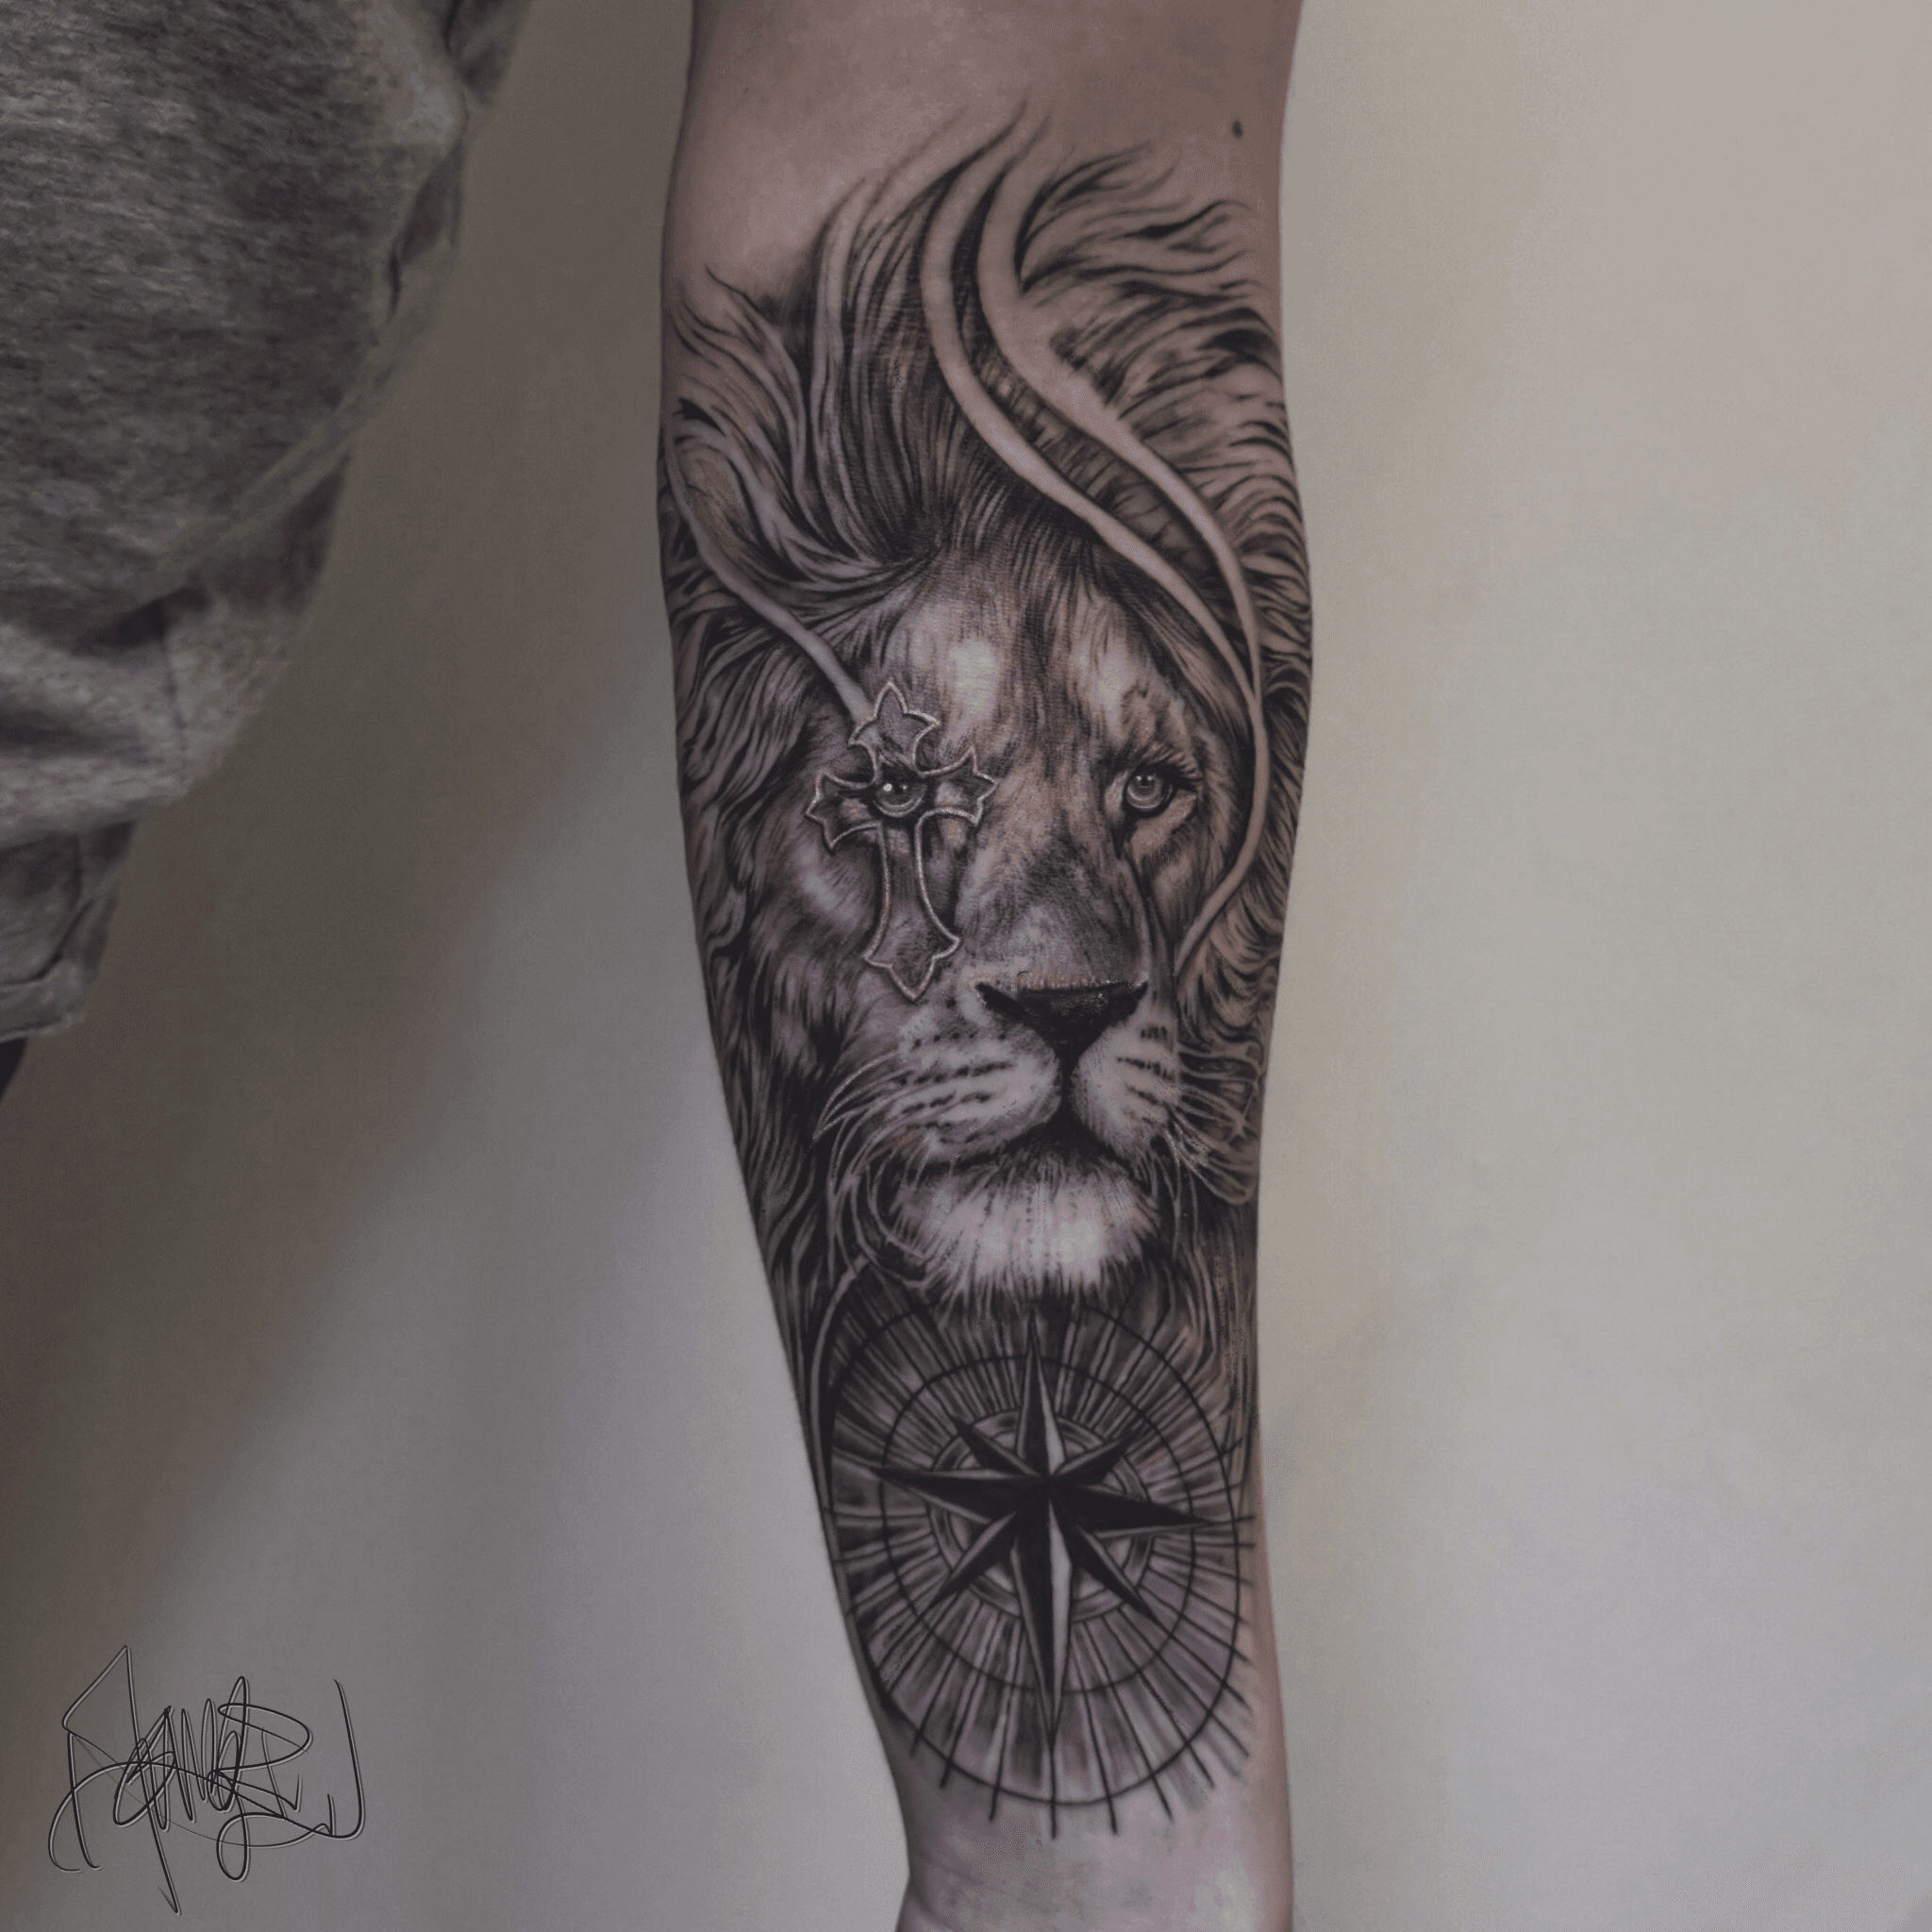 Grant Butler on Twitter Added a stone lion to this sleeve today stone  lion sleevetattoo blackandgrey tattoo ink forearm rose statue  httpstcoUS6ozuHDa6  Twitter